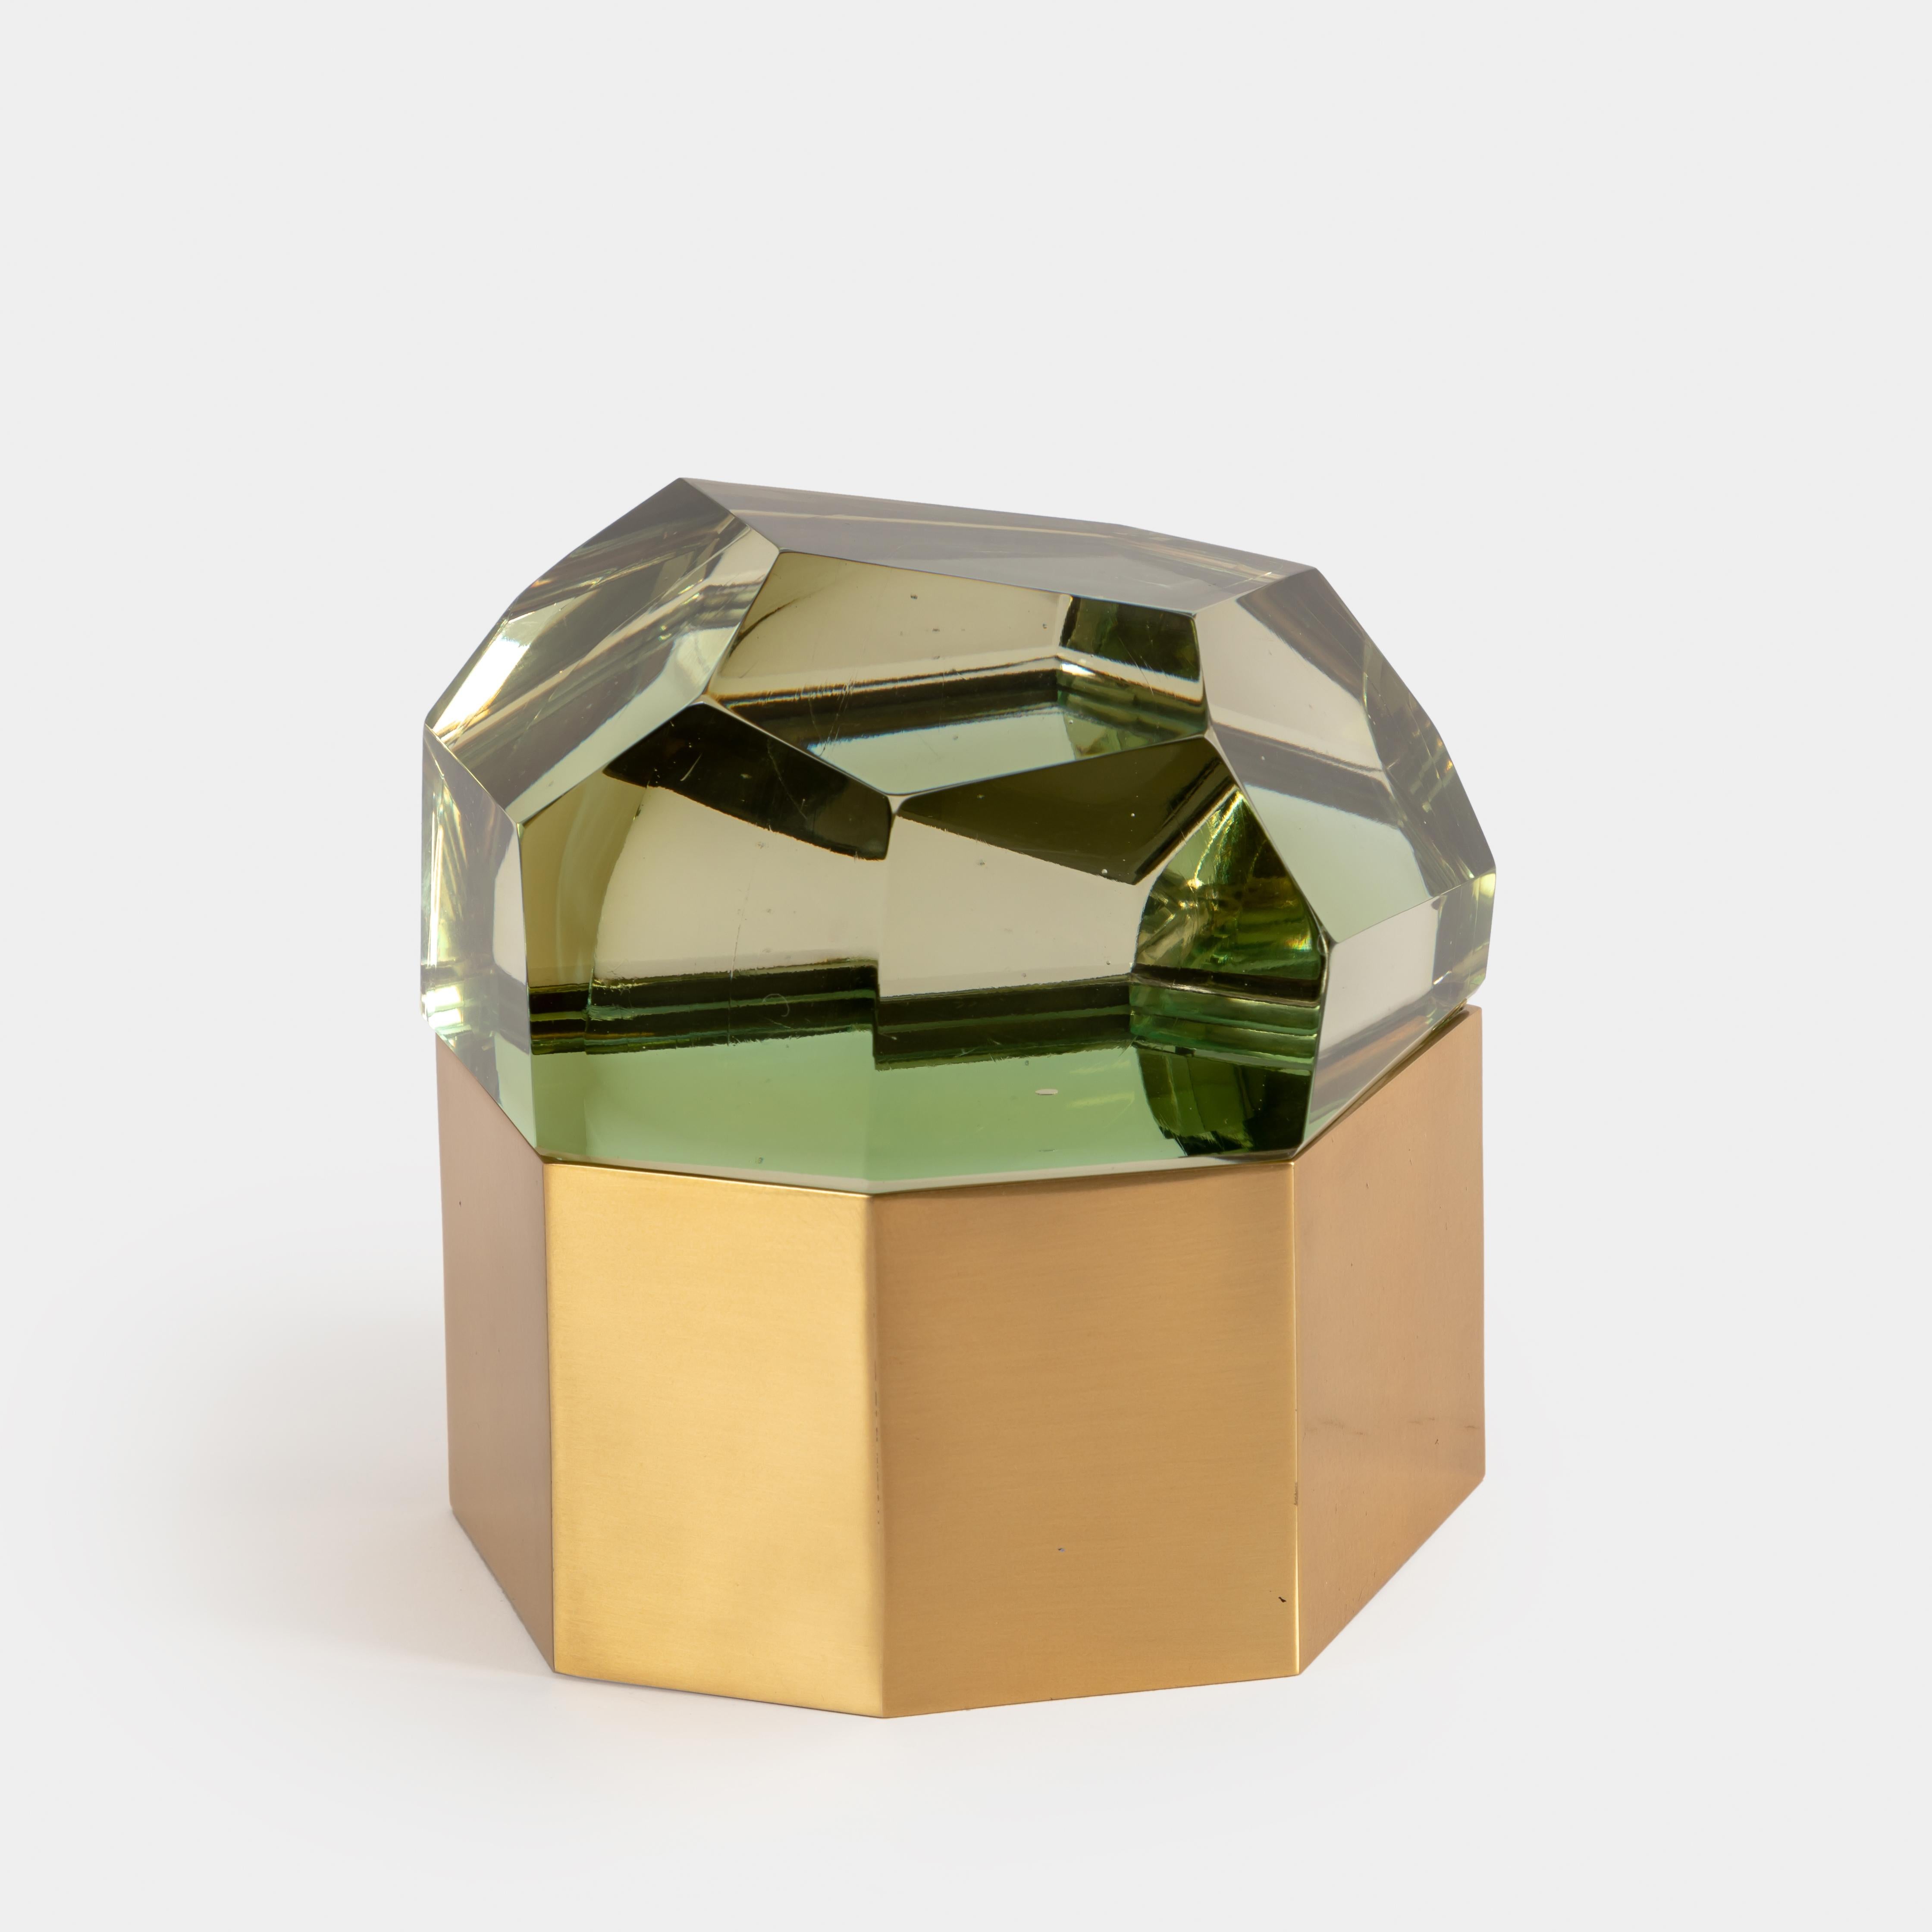 Roberto Giulio Rida exquisite chartreuse 'Diamante Murano' glass box with thick glass ground and polished to create faceted fitted top with gilt brass base covered inside with steel, Italy, 2017. The glass is made of crystal glass core, then covered